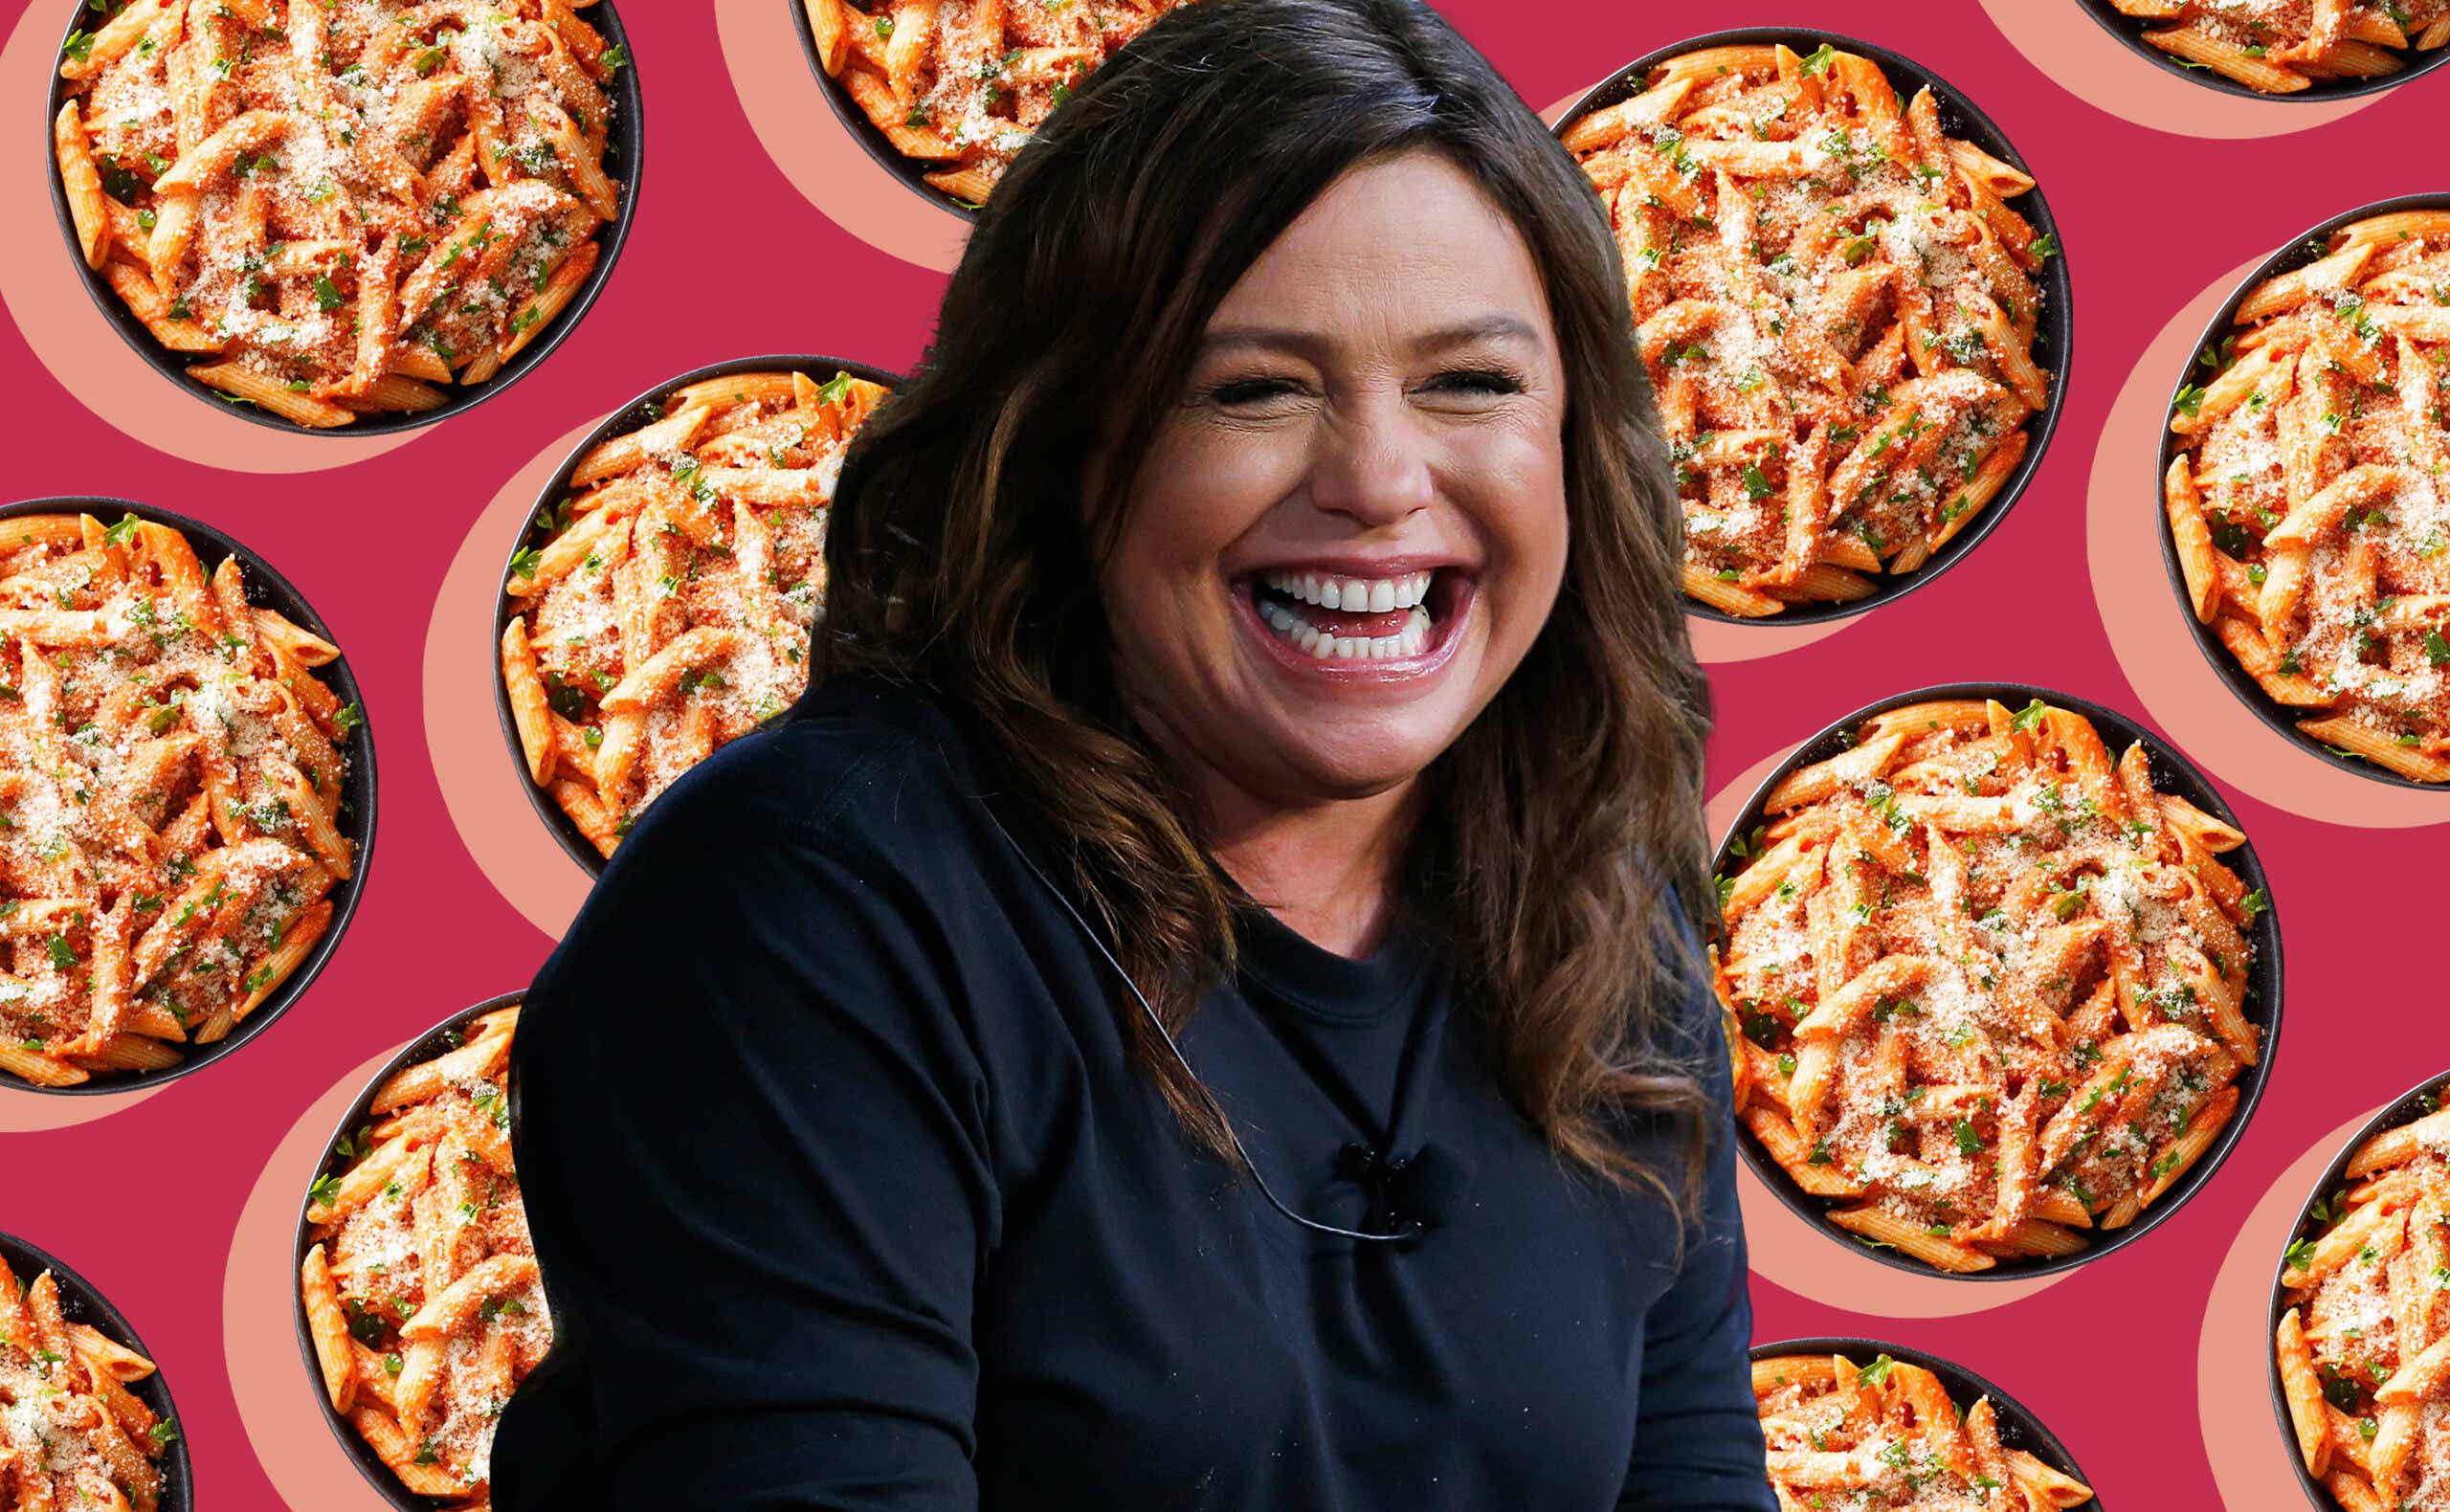 Rachel Ray smiles as pasta bowls float behind her head.